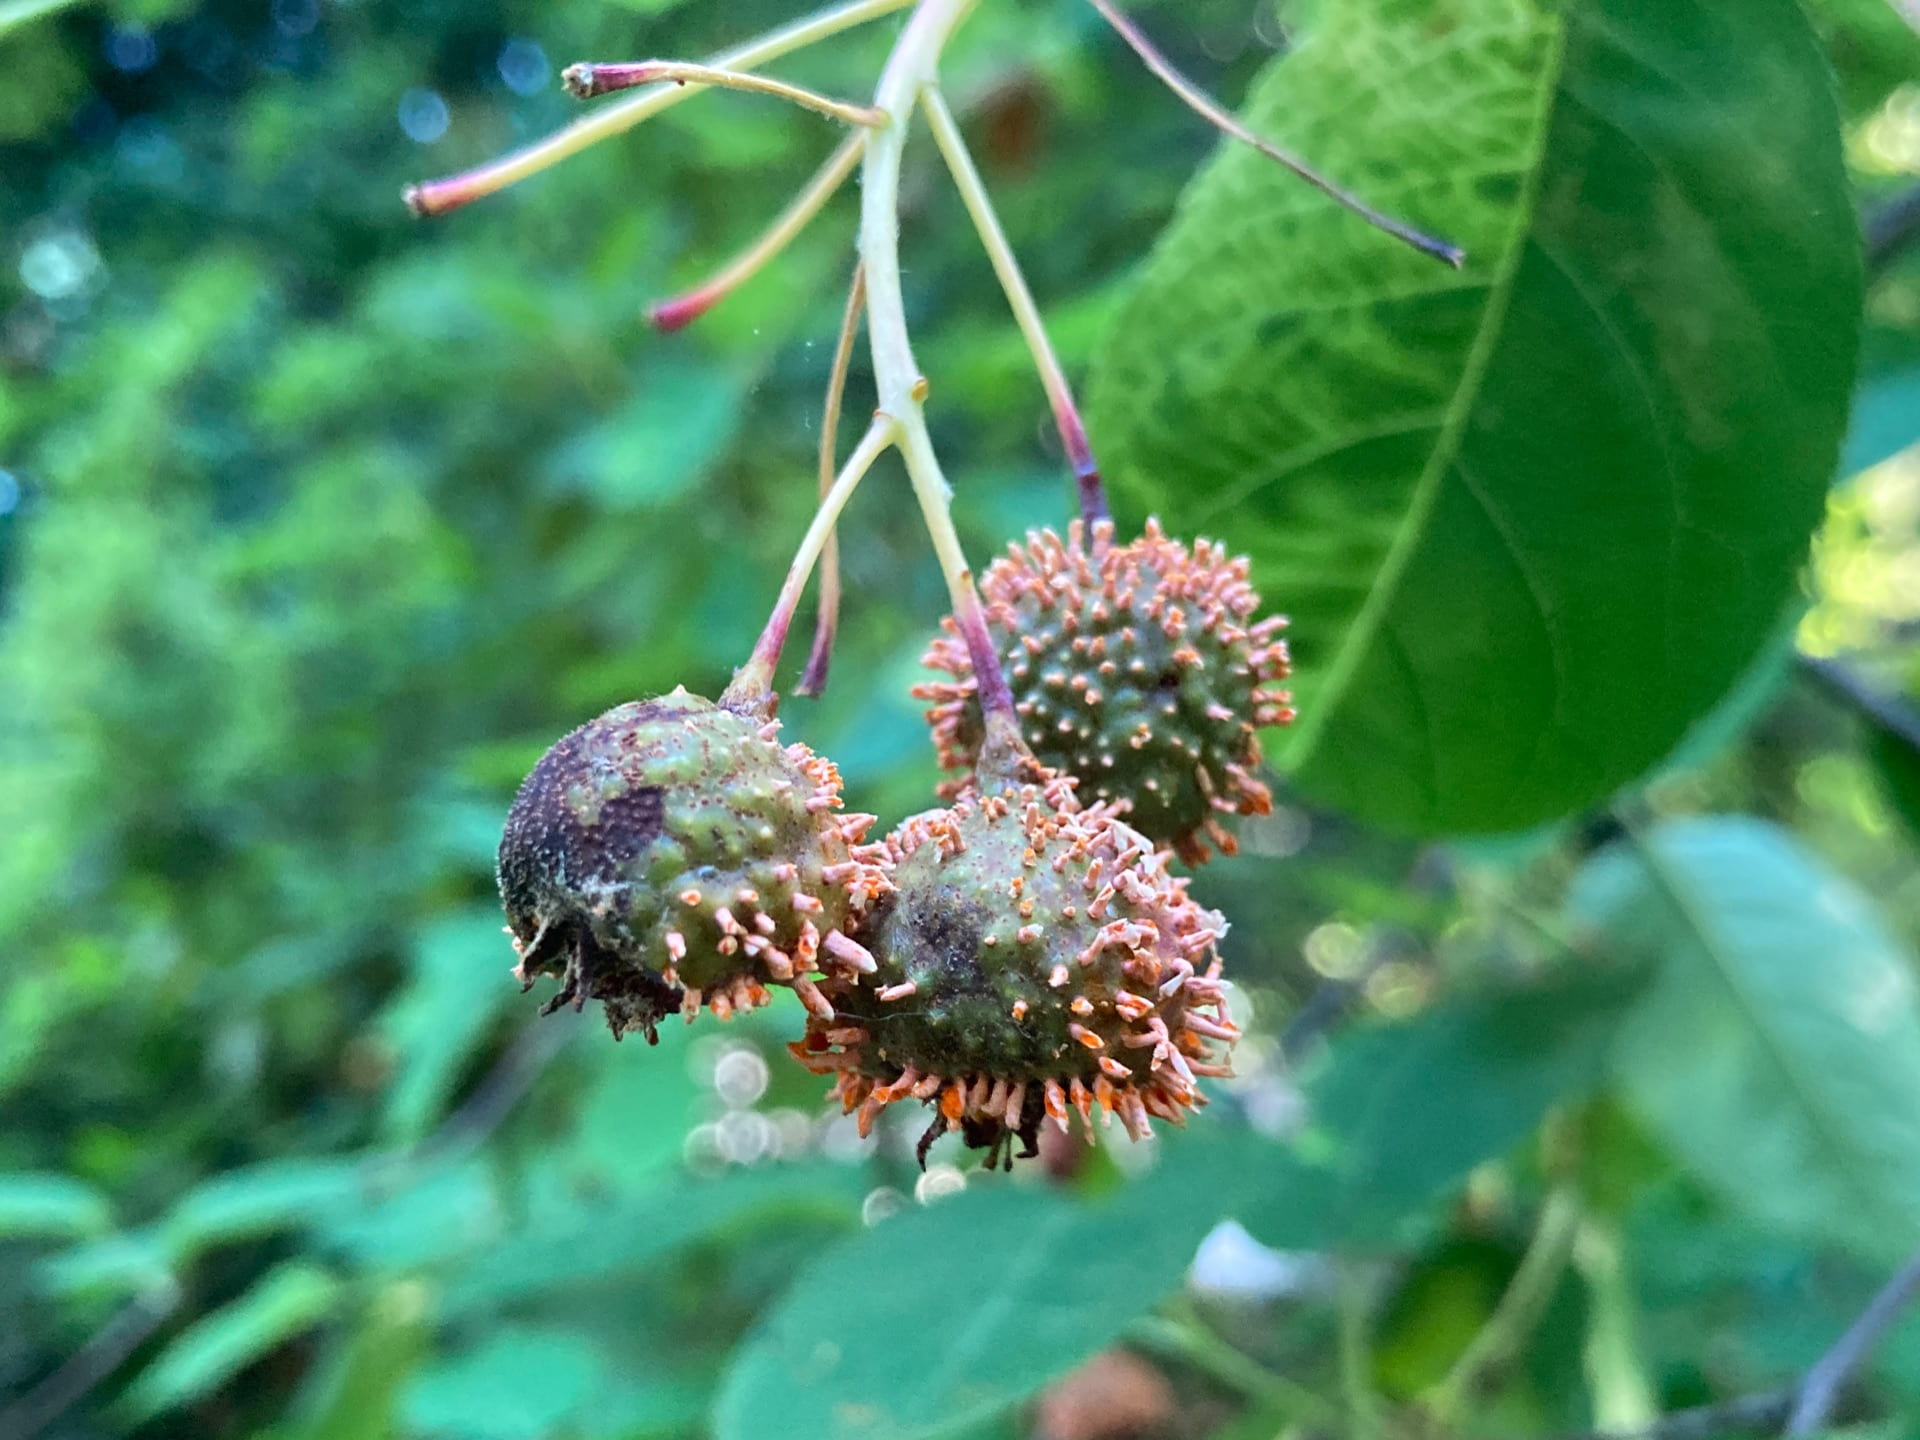 These Amelanchier fruits are affected by cedar apple rust, a fungus that impacts members of the rose family, but requires cedar trees to complete its life cycle.